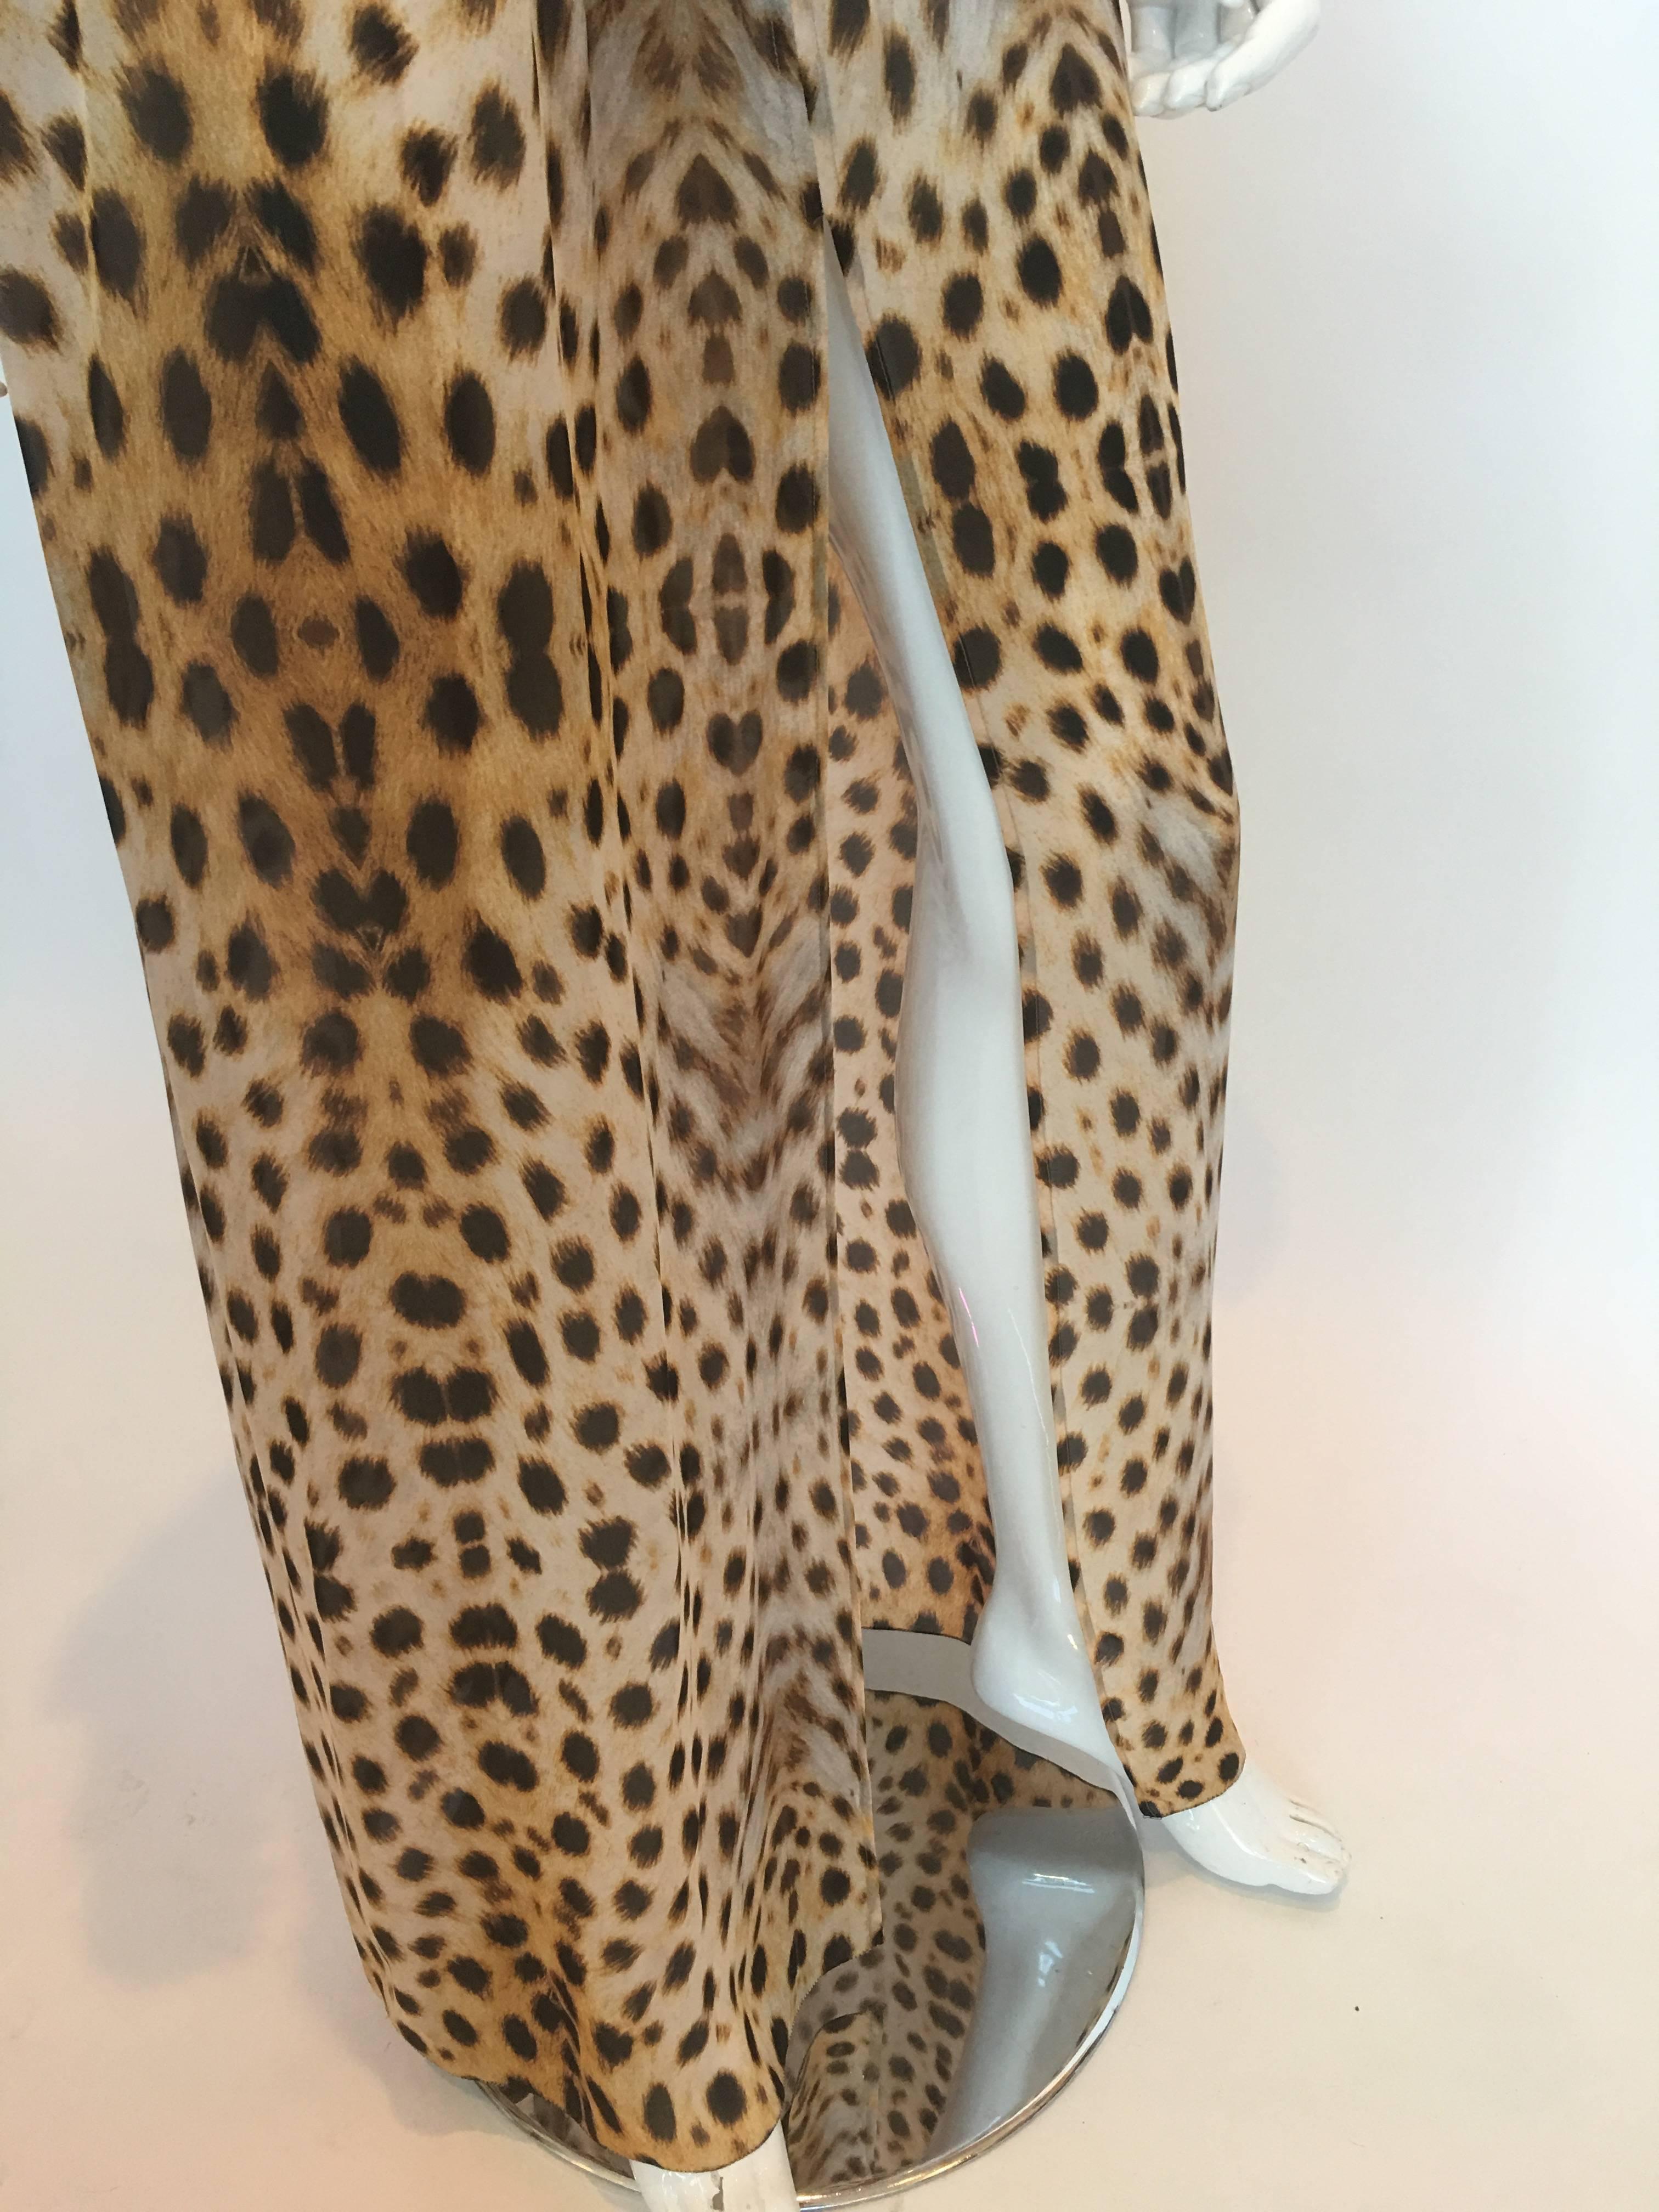 Roberto Cavalli Silk Leopard Print Dress

Made in Italy 
Size 40

Shoulders - seam to seam: 27"
Sleeve length - shoulder to hem: 13.5"
Armpit to armpit: 21"
Bust: 25"
Waist: 13.5" MAX stretch 22"
Hip: 22"
Length -